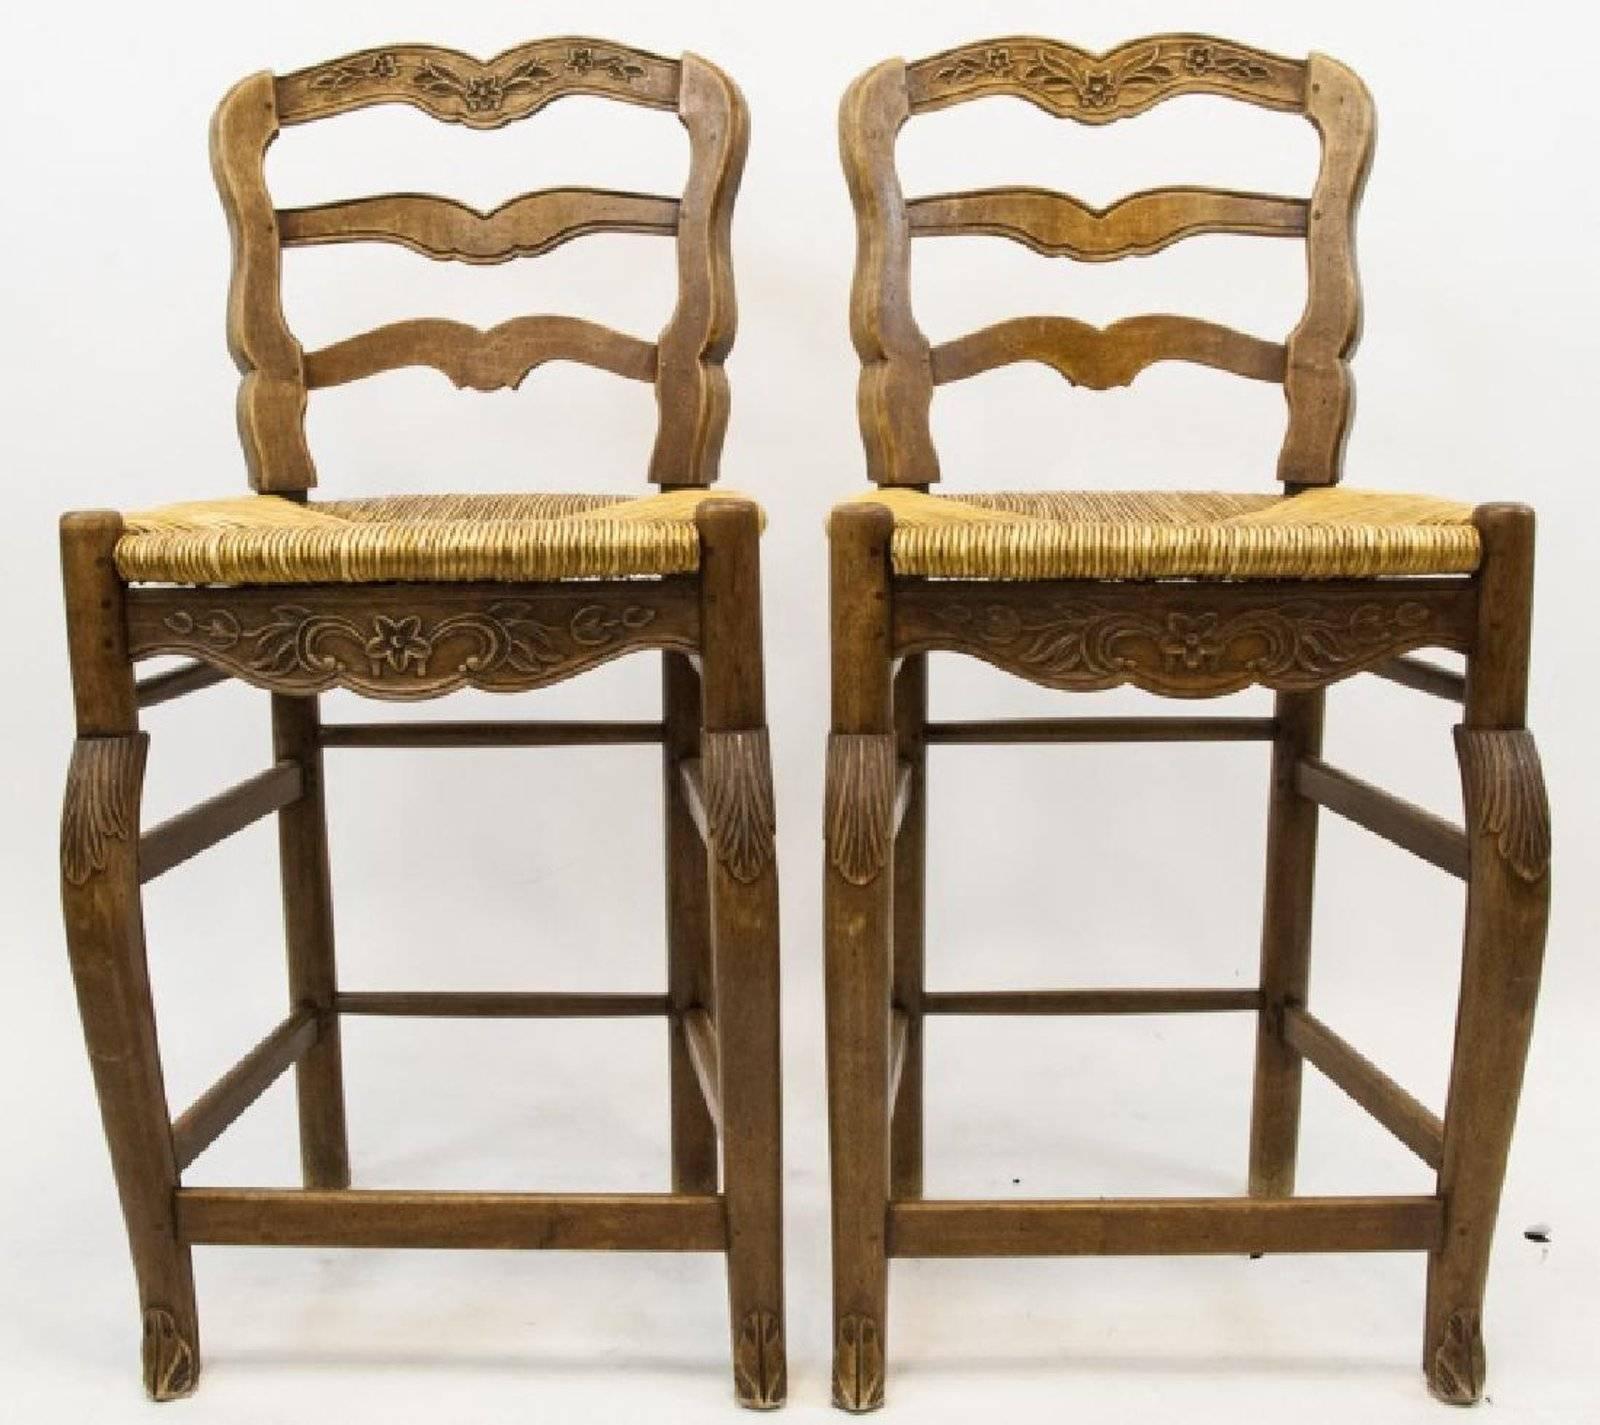 French Country Ladder Back Bar Stools, French Inspired Bar Stools